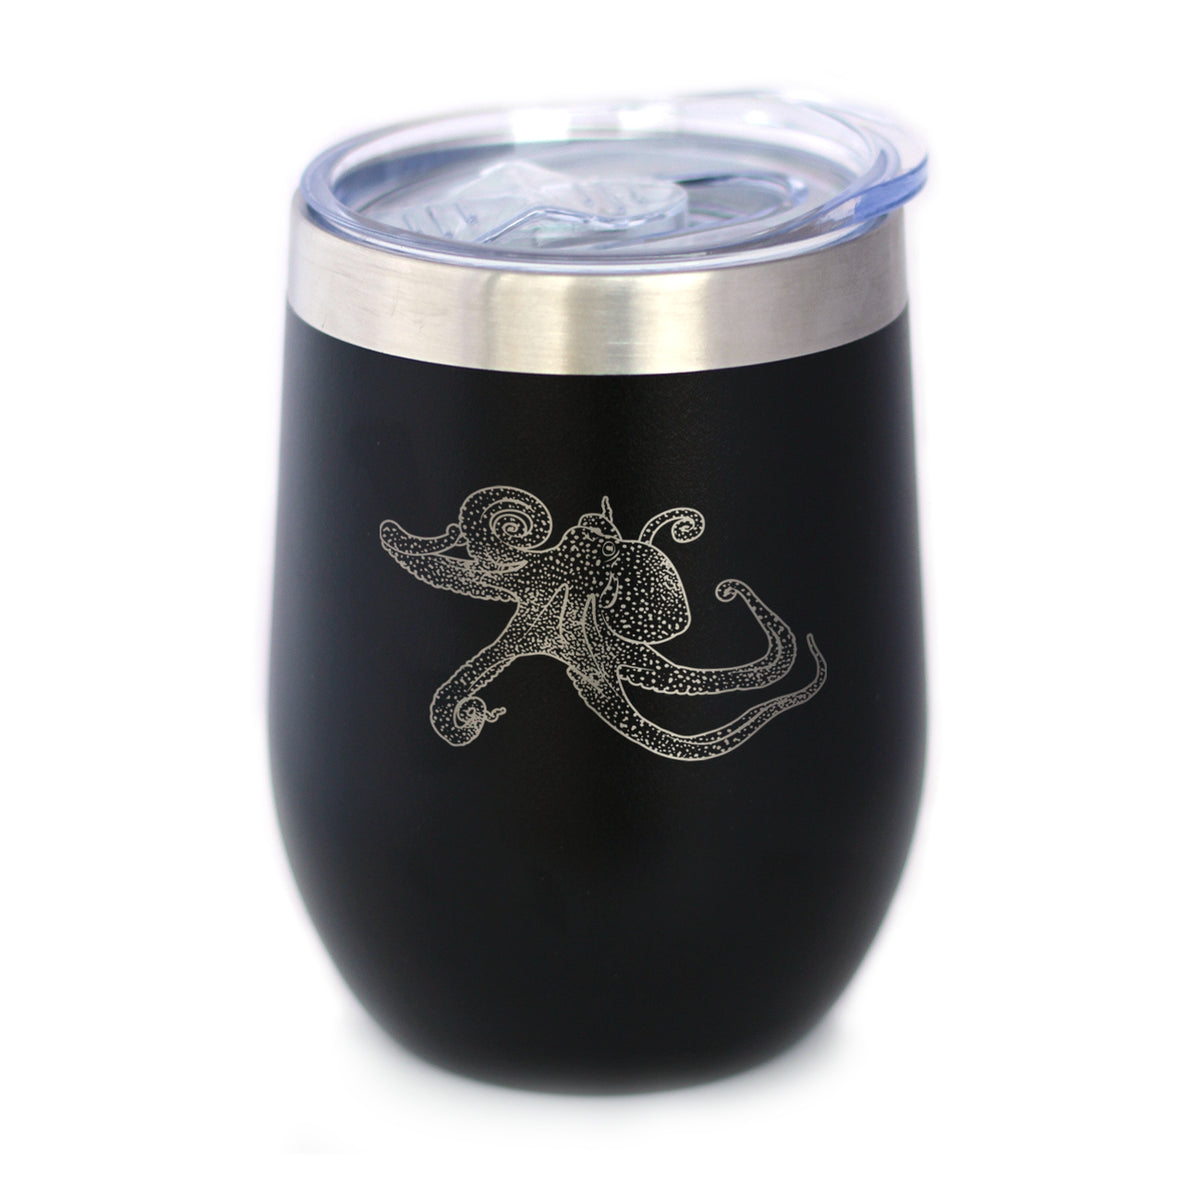 Octopus - Wine Tumbler Glass with Sliding Lid - Stainless Steel Travel Mug - Ocean Gifts and Decor for Women and Men